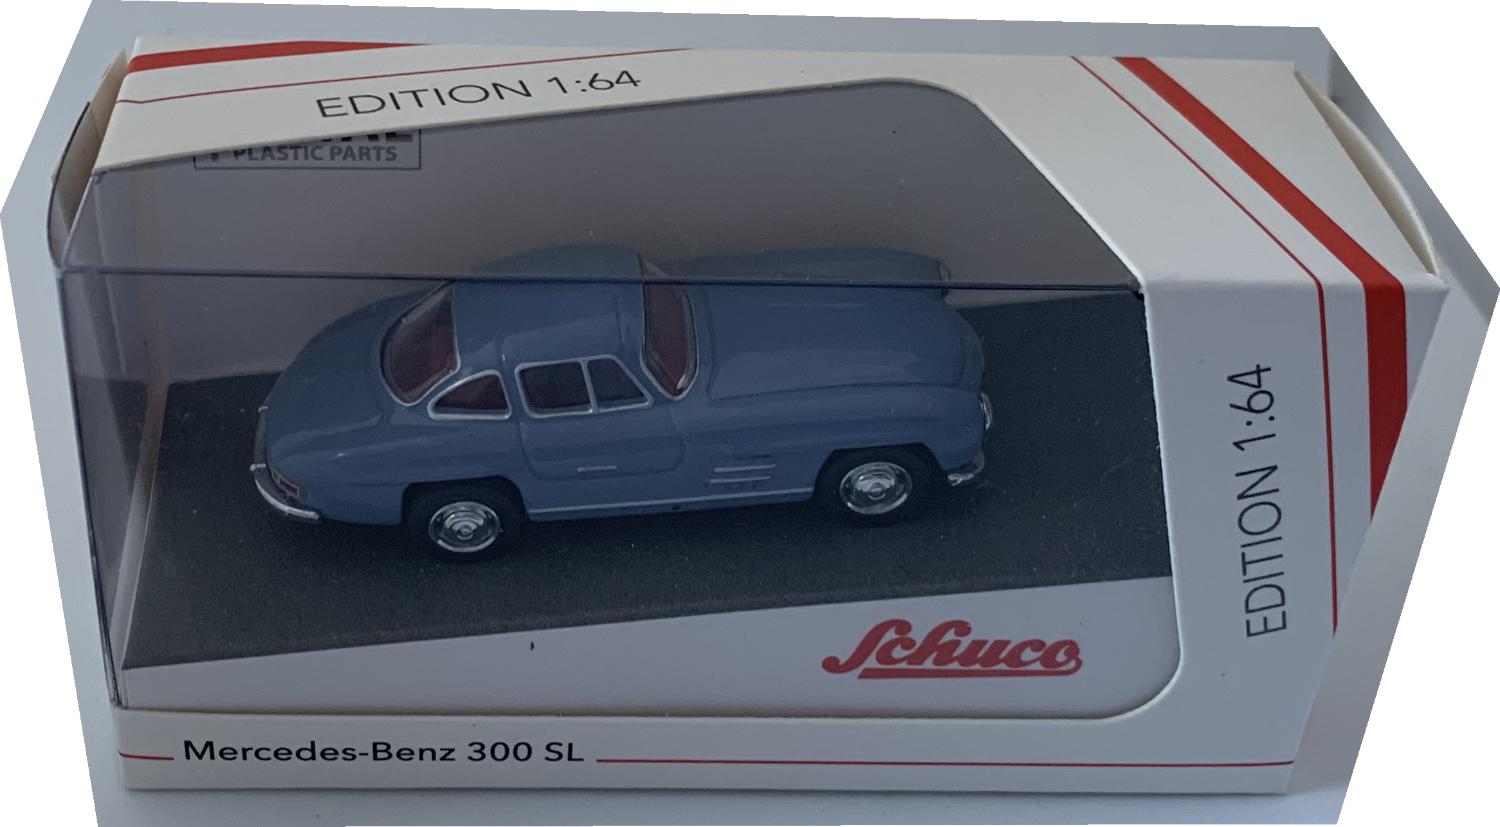 Mercedes Benz 300 SL in blue 1:64 scale model from Schuco